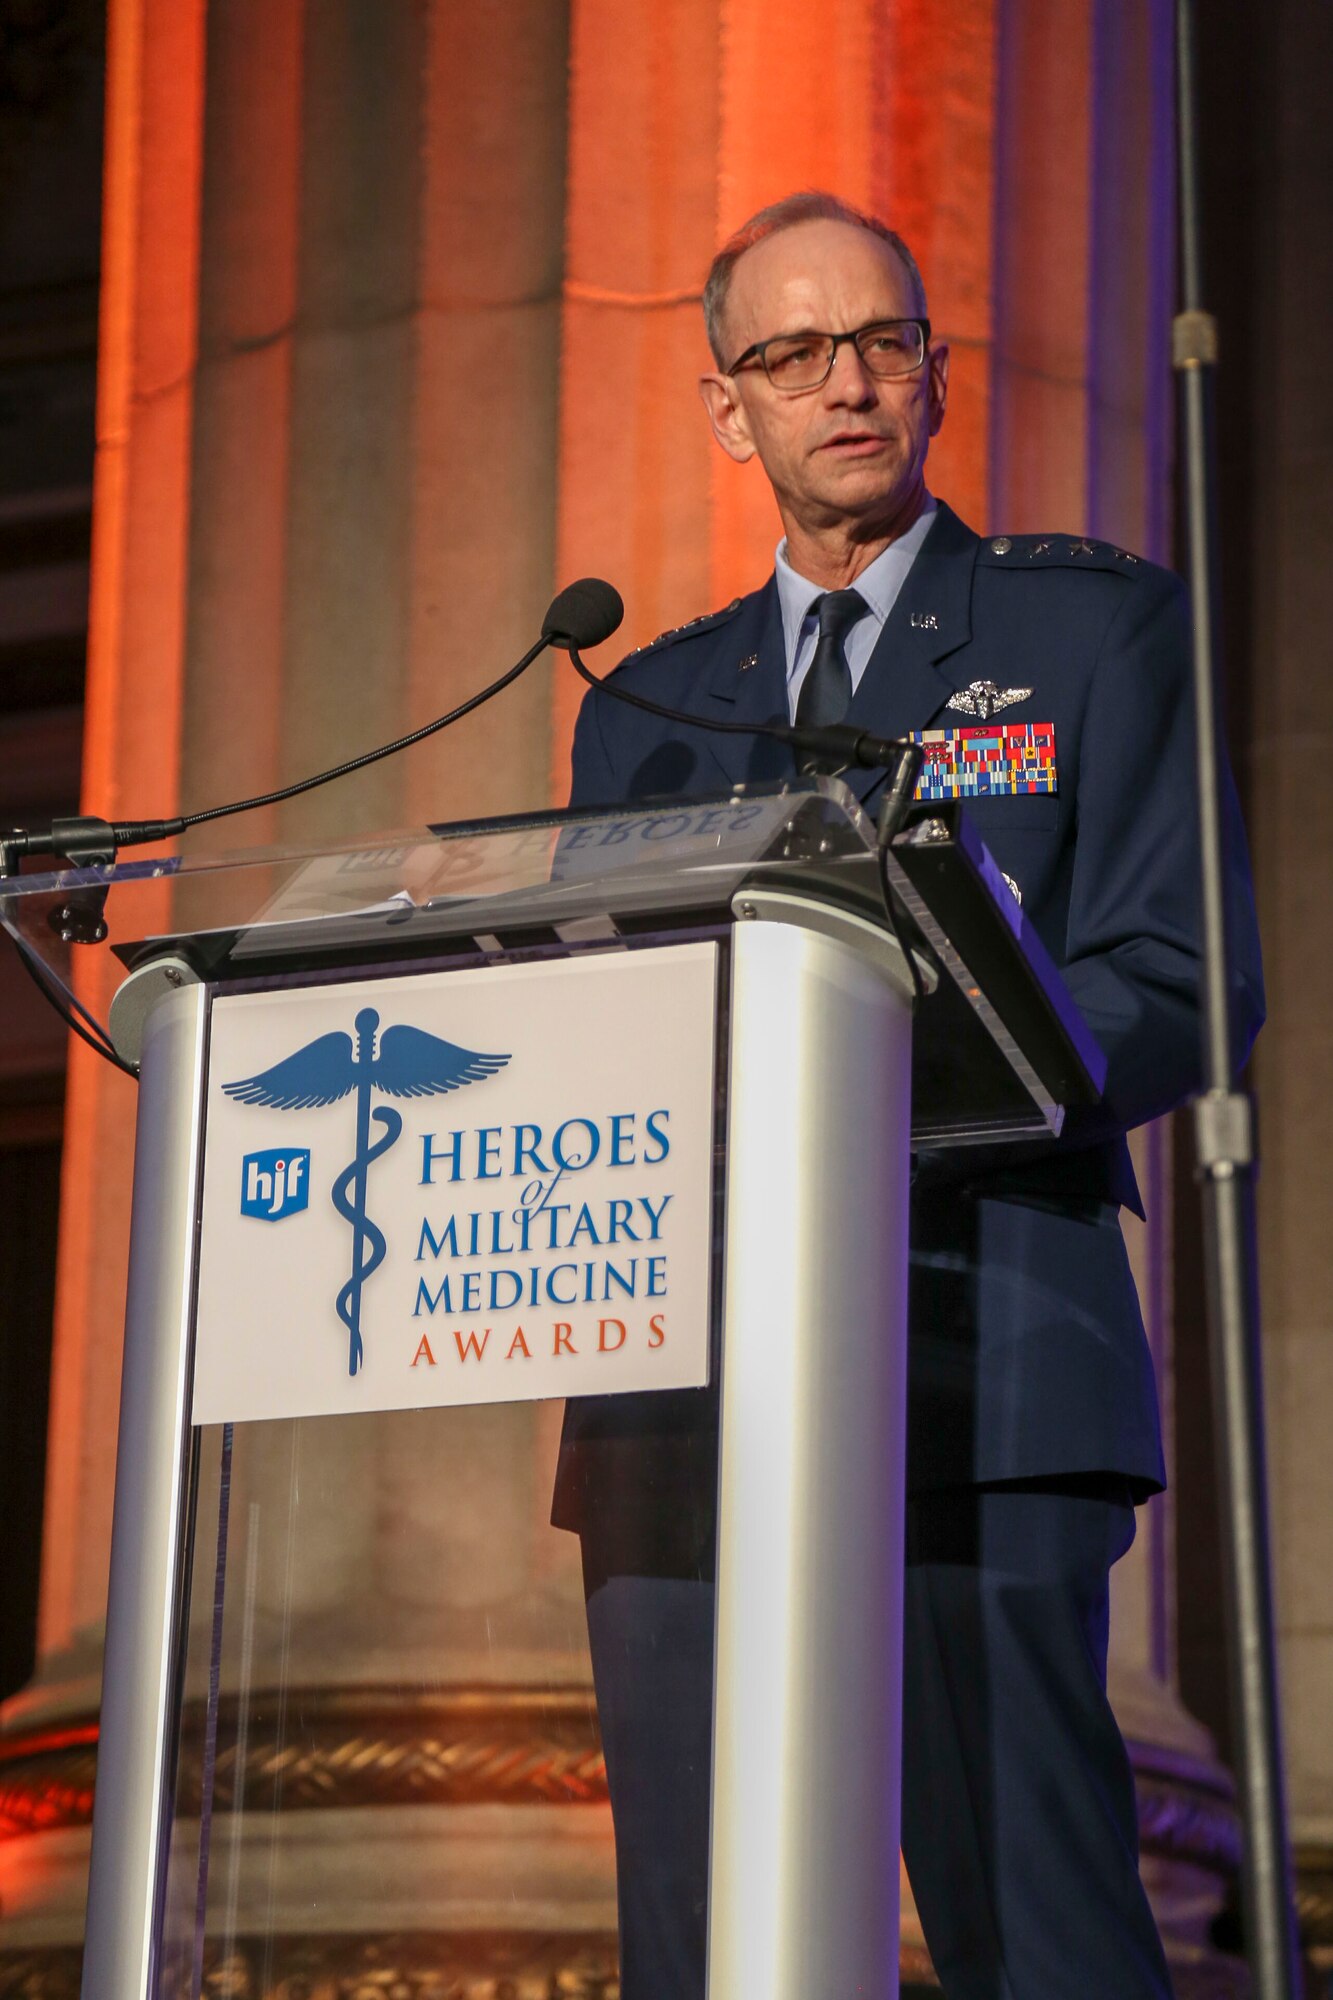 U.S. Air Force Surgeon General Lt. Gen. Mark Ediger gives remarks at the 2018 Heroes of Military Medicine Award Ceremony in Washington, D.C., May 3, 2018. (Courtesy photo by Henry M. Jackson Foundation for the Advancement of Military Medicine)